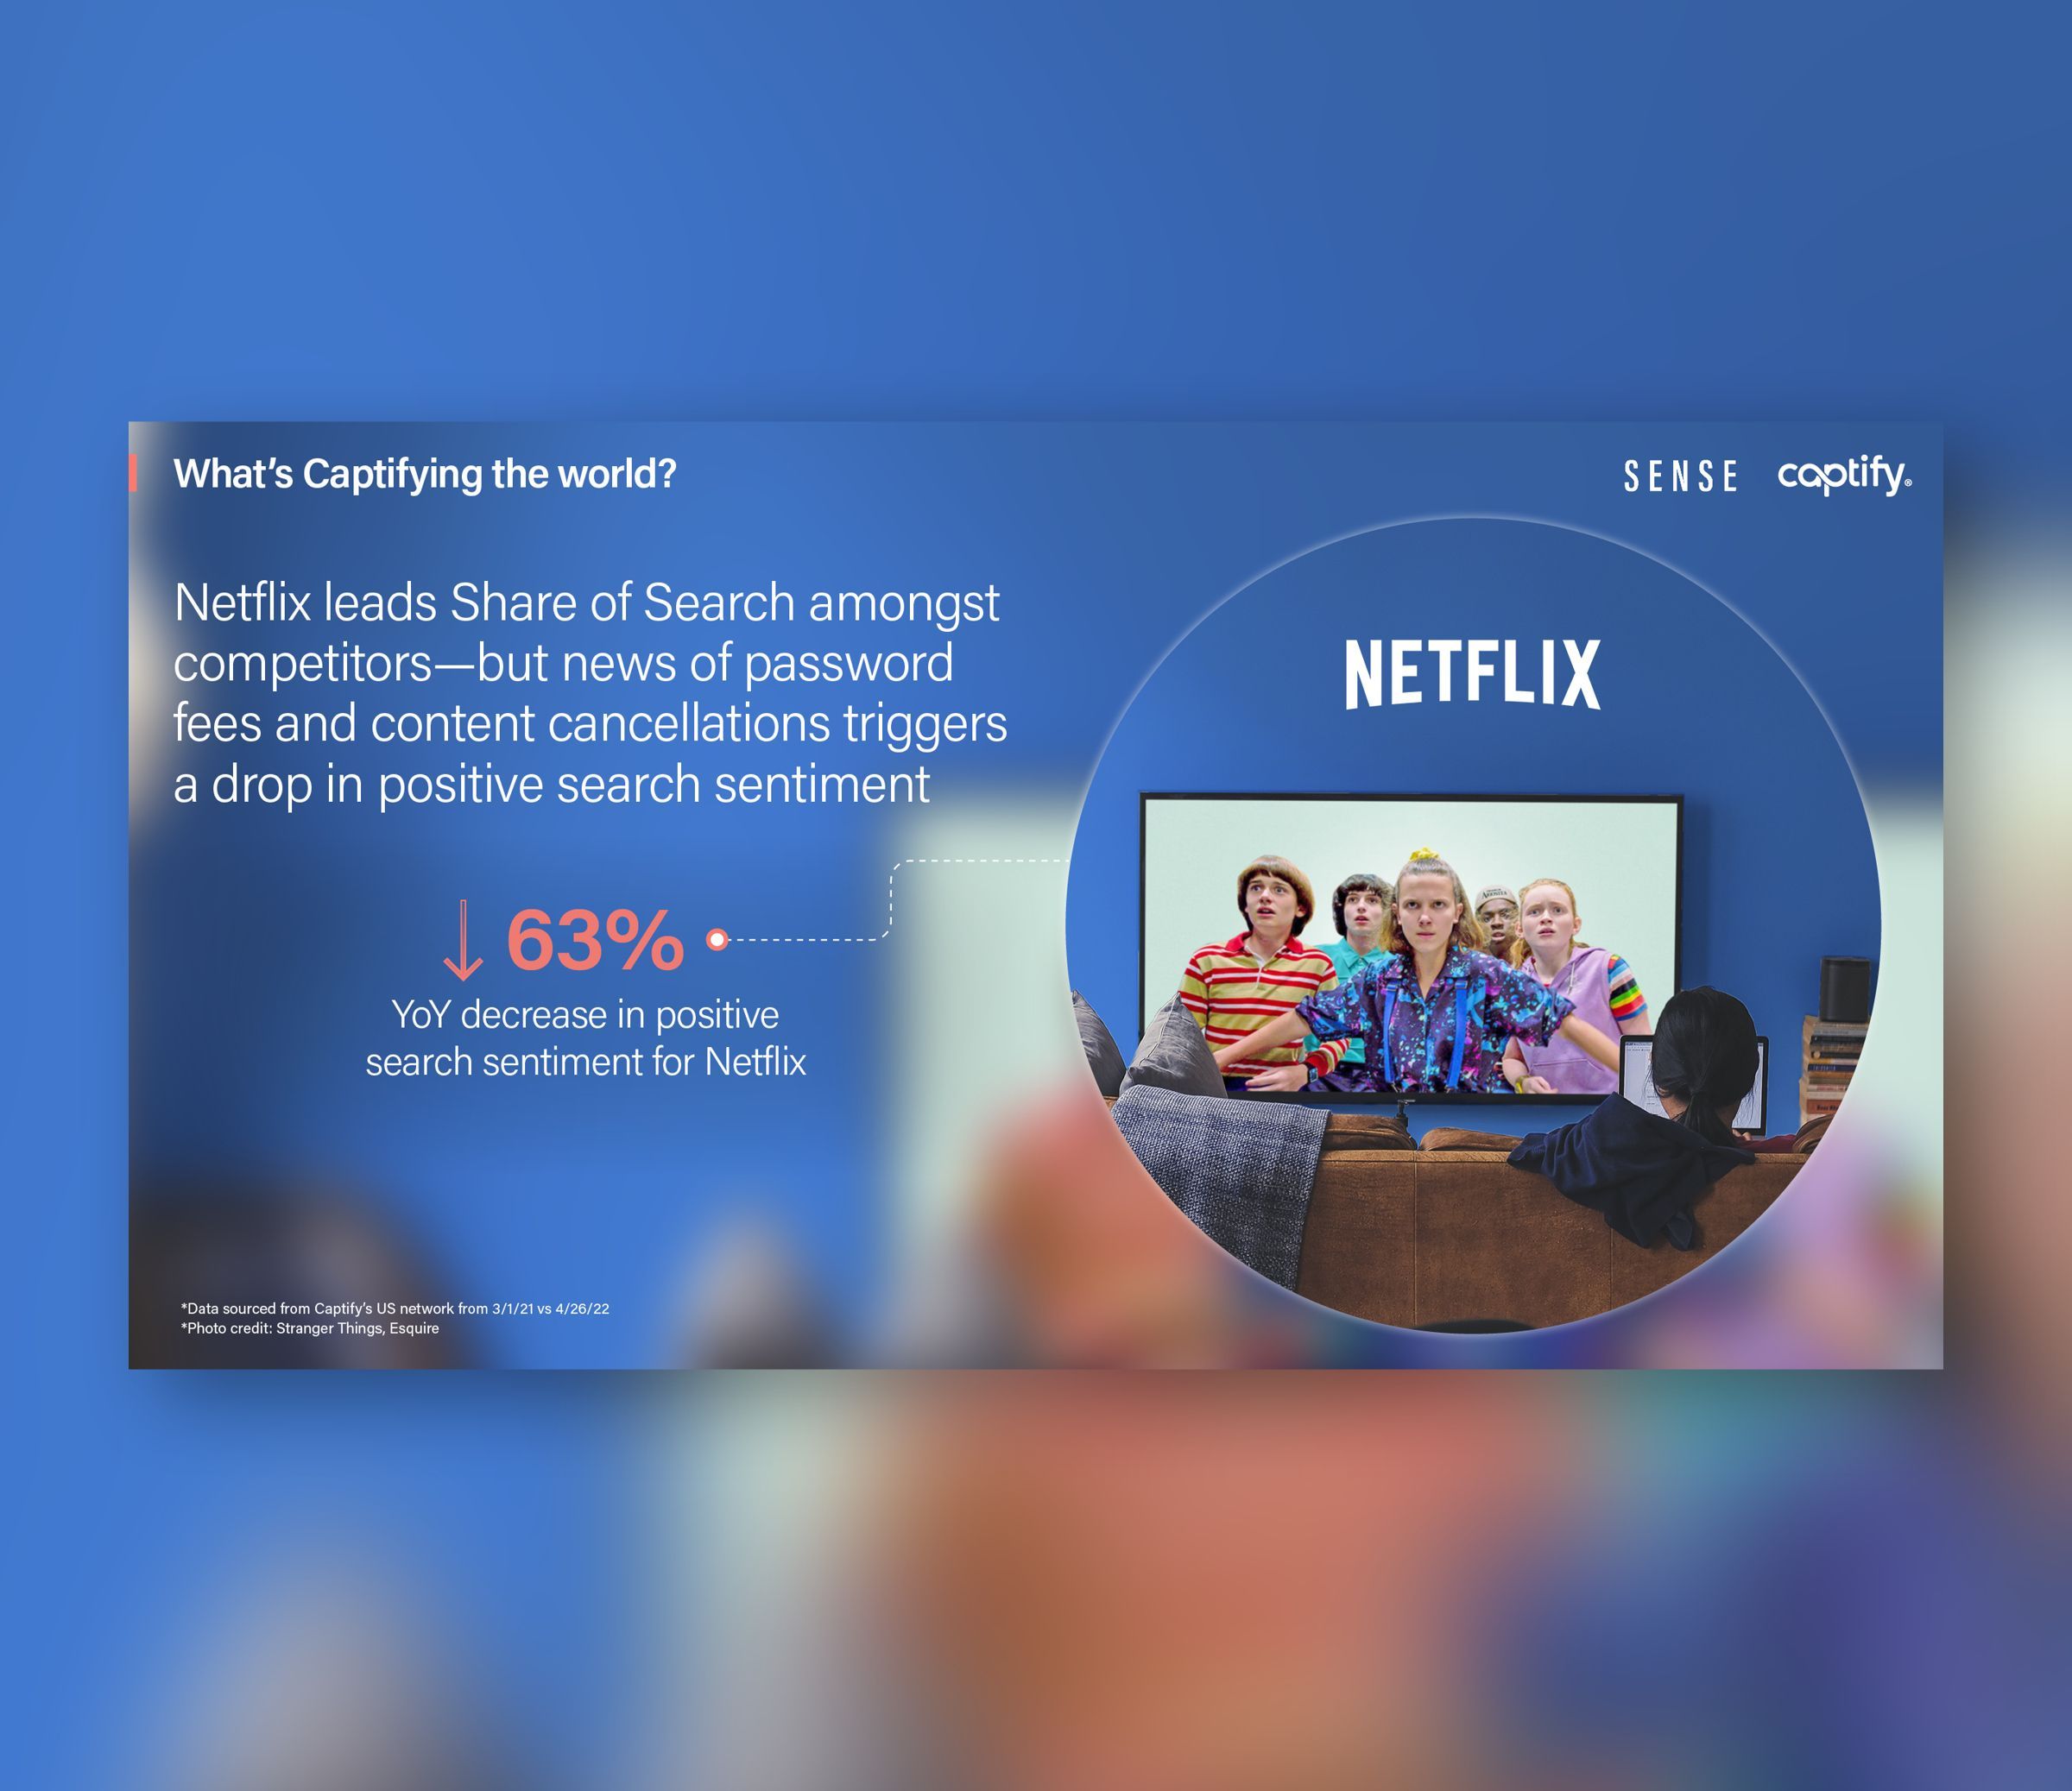 What’s Captifying the World: Netflix Leads Share of Search Amongst Competitors — But News of Password Fees and Content Cancellations Triggers a Drop In Positive Search Sentiment